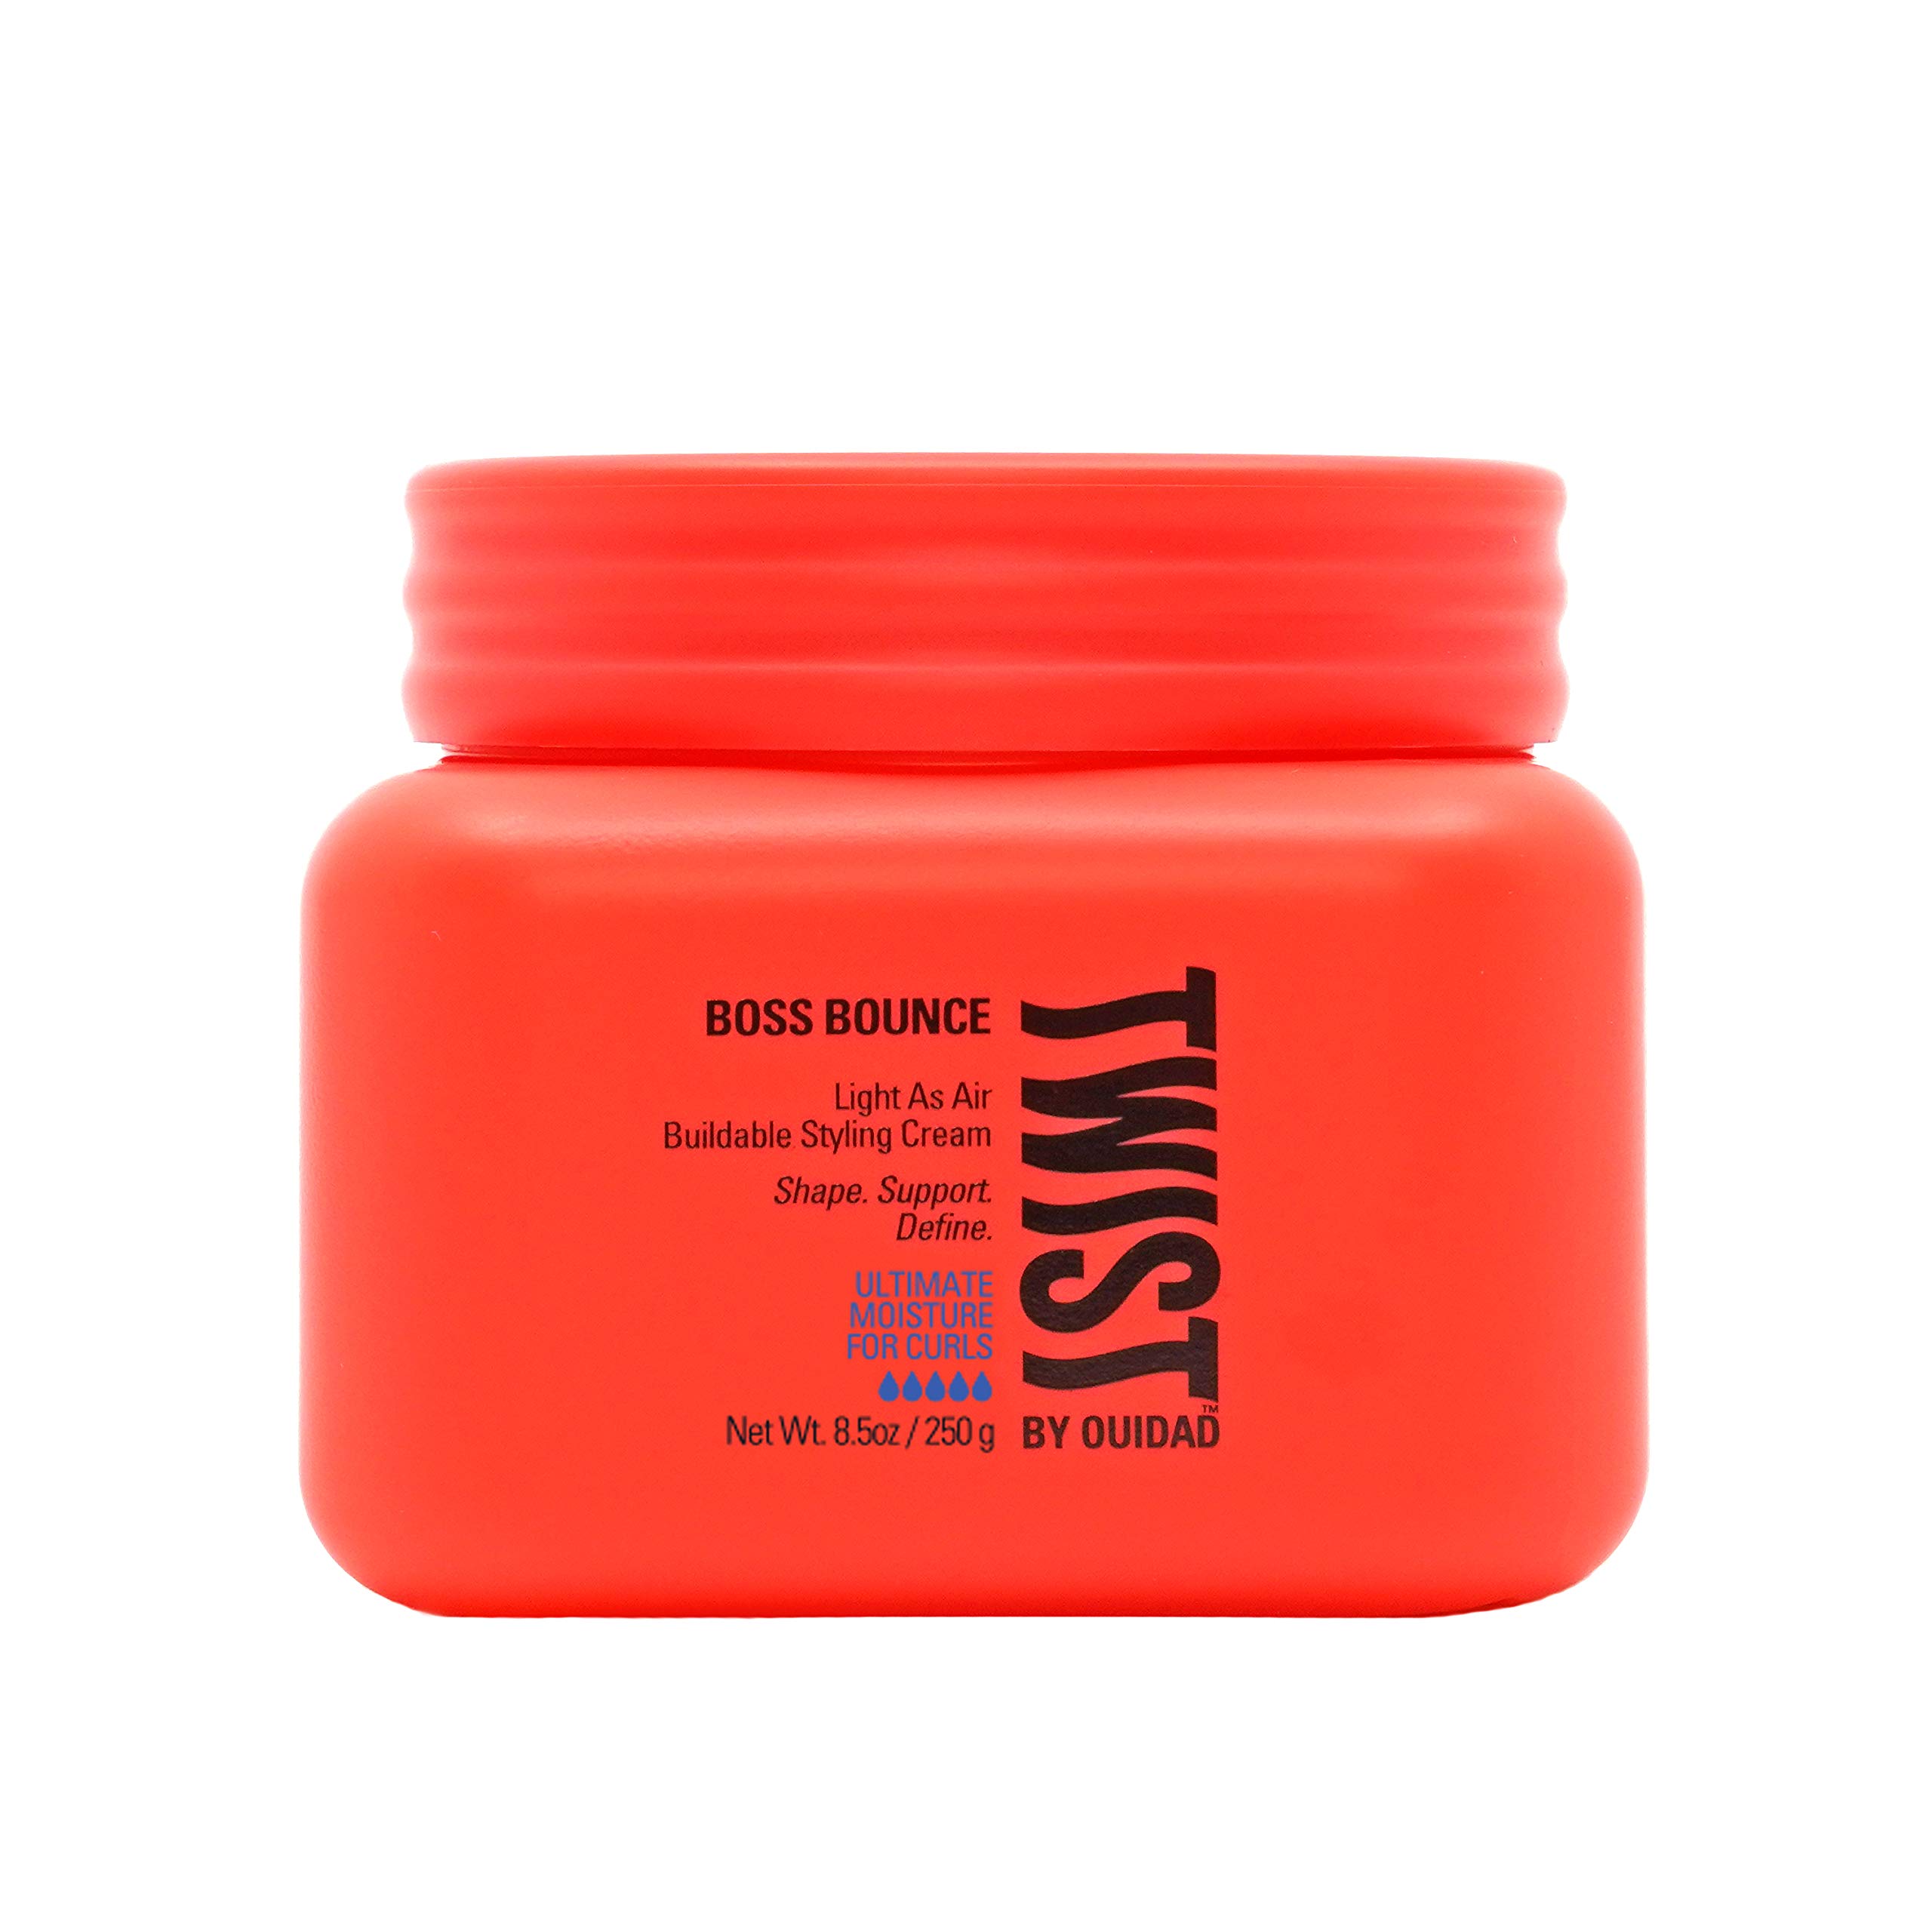 TWIST Boss Bounce Light as Air Buildable Styling Cream, 3.4 ounces UPC:736658544978